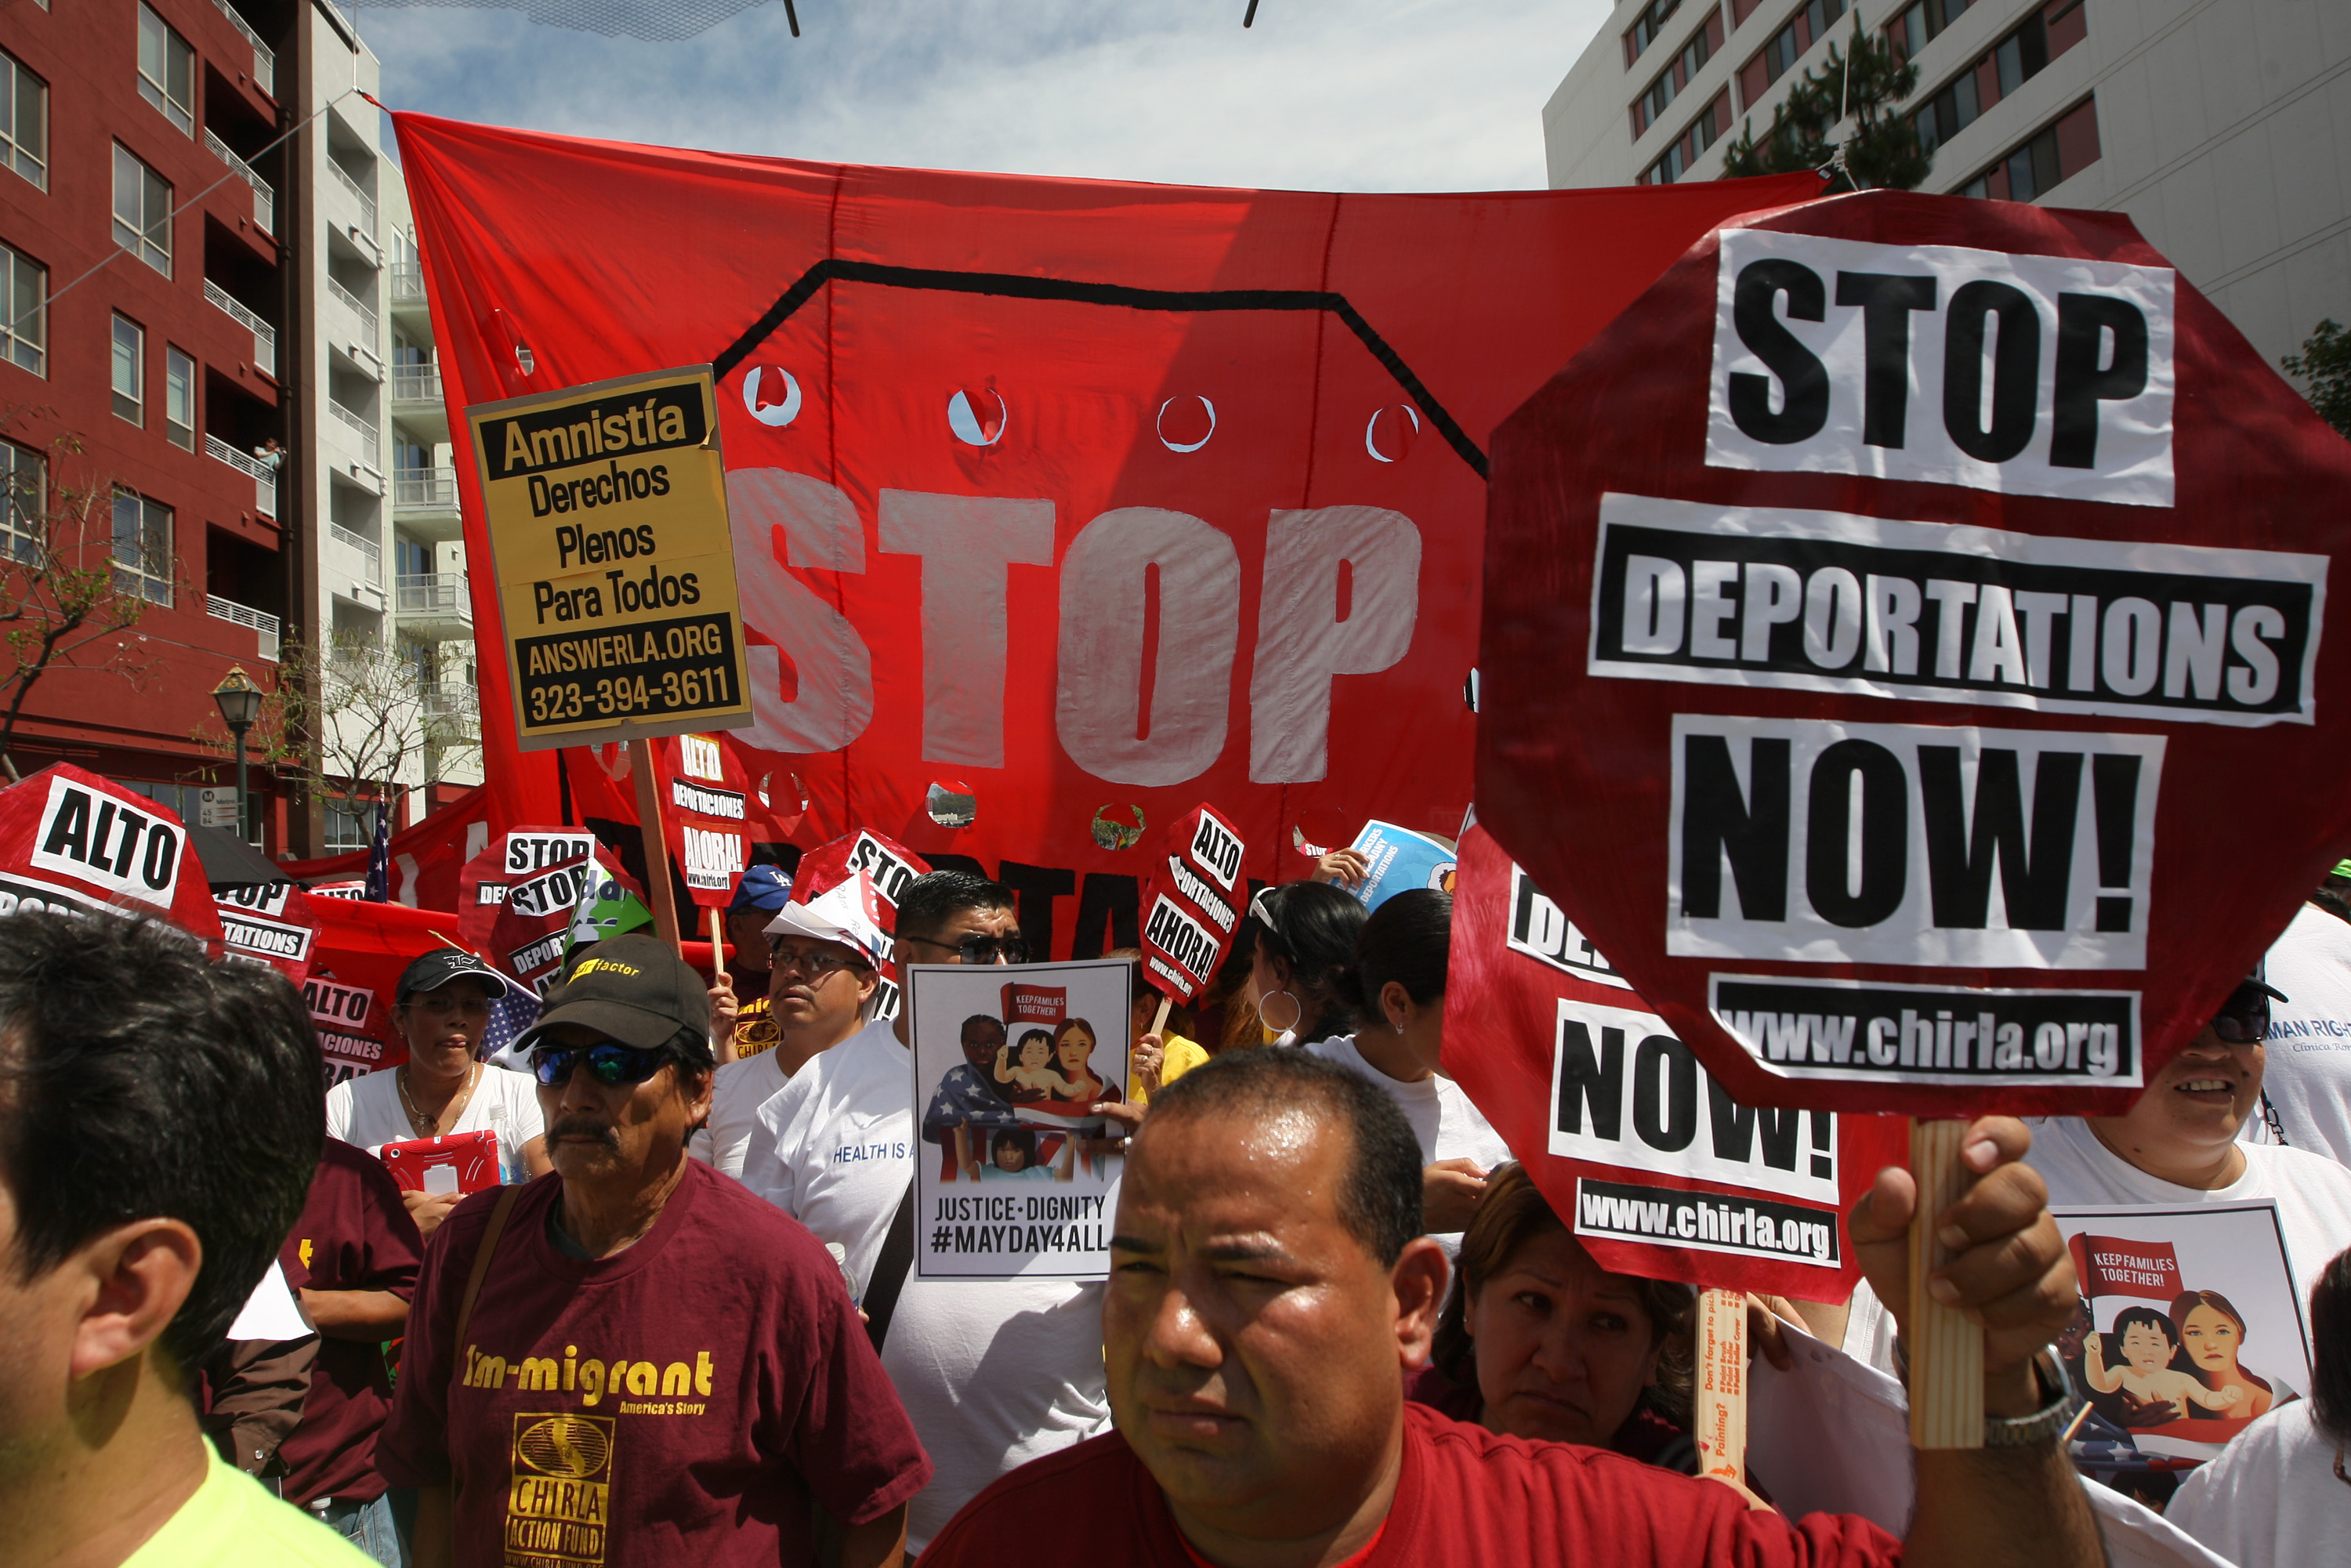 Marchers rally under the Chinatown Gateway before marching to the Metropolitan Detention Center during one a several May Day immigration-themed events on May 1, 2014 in Los Angeles, California. Demonstrators are calling for immigration reform and an end to deportations of undocumented residents. (David McNew&mdash;Getty Images)